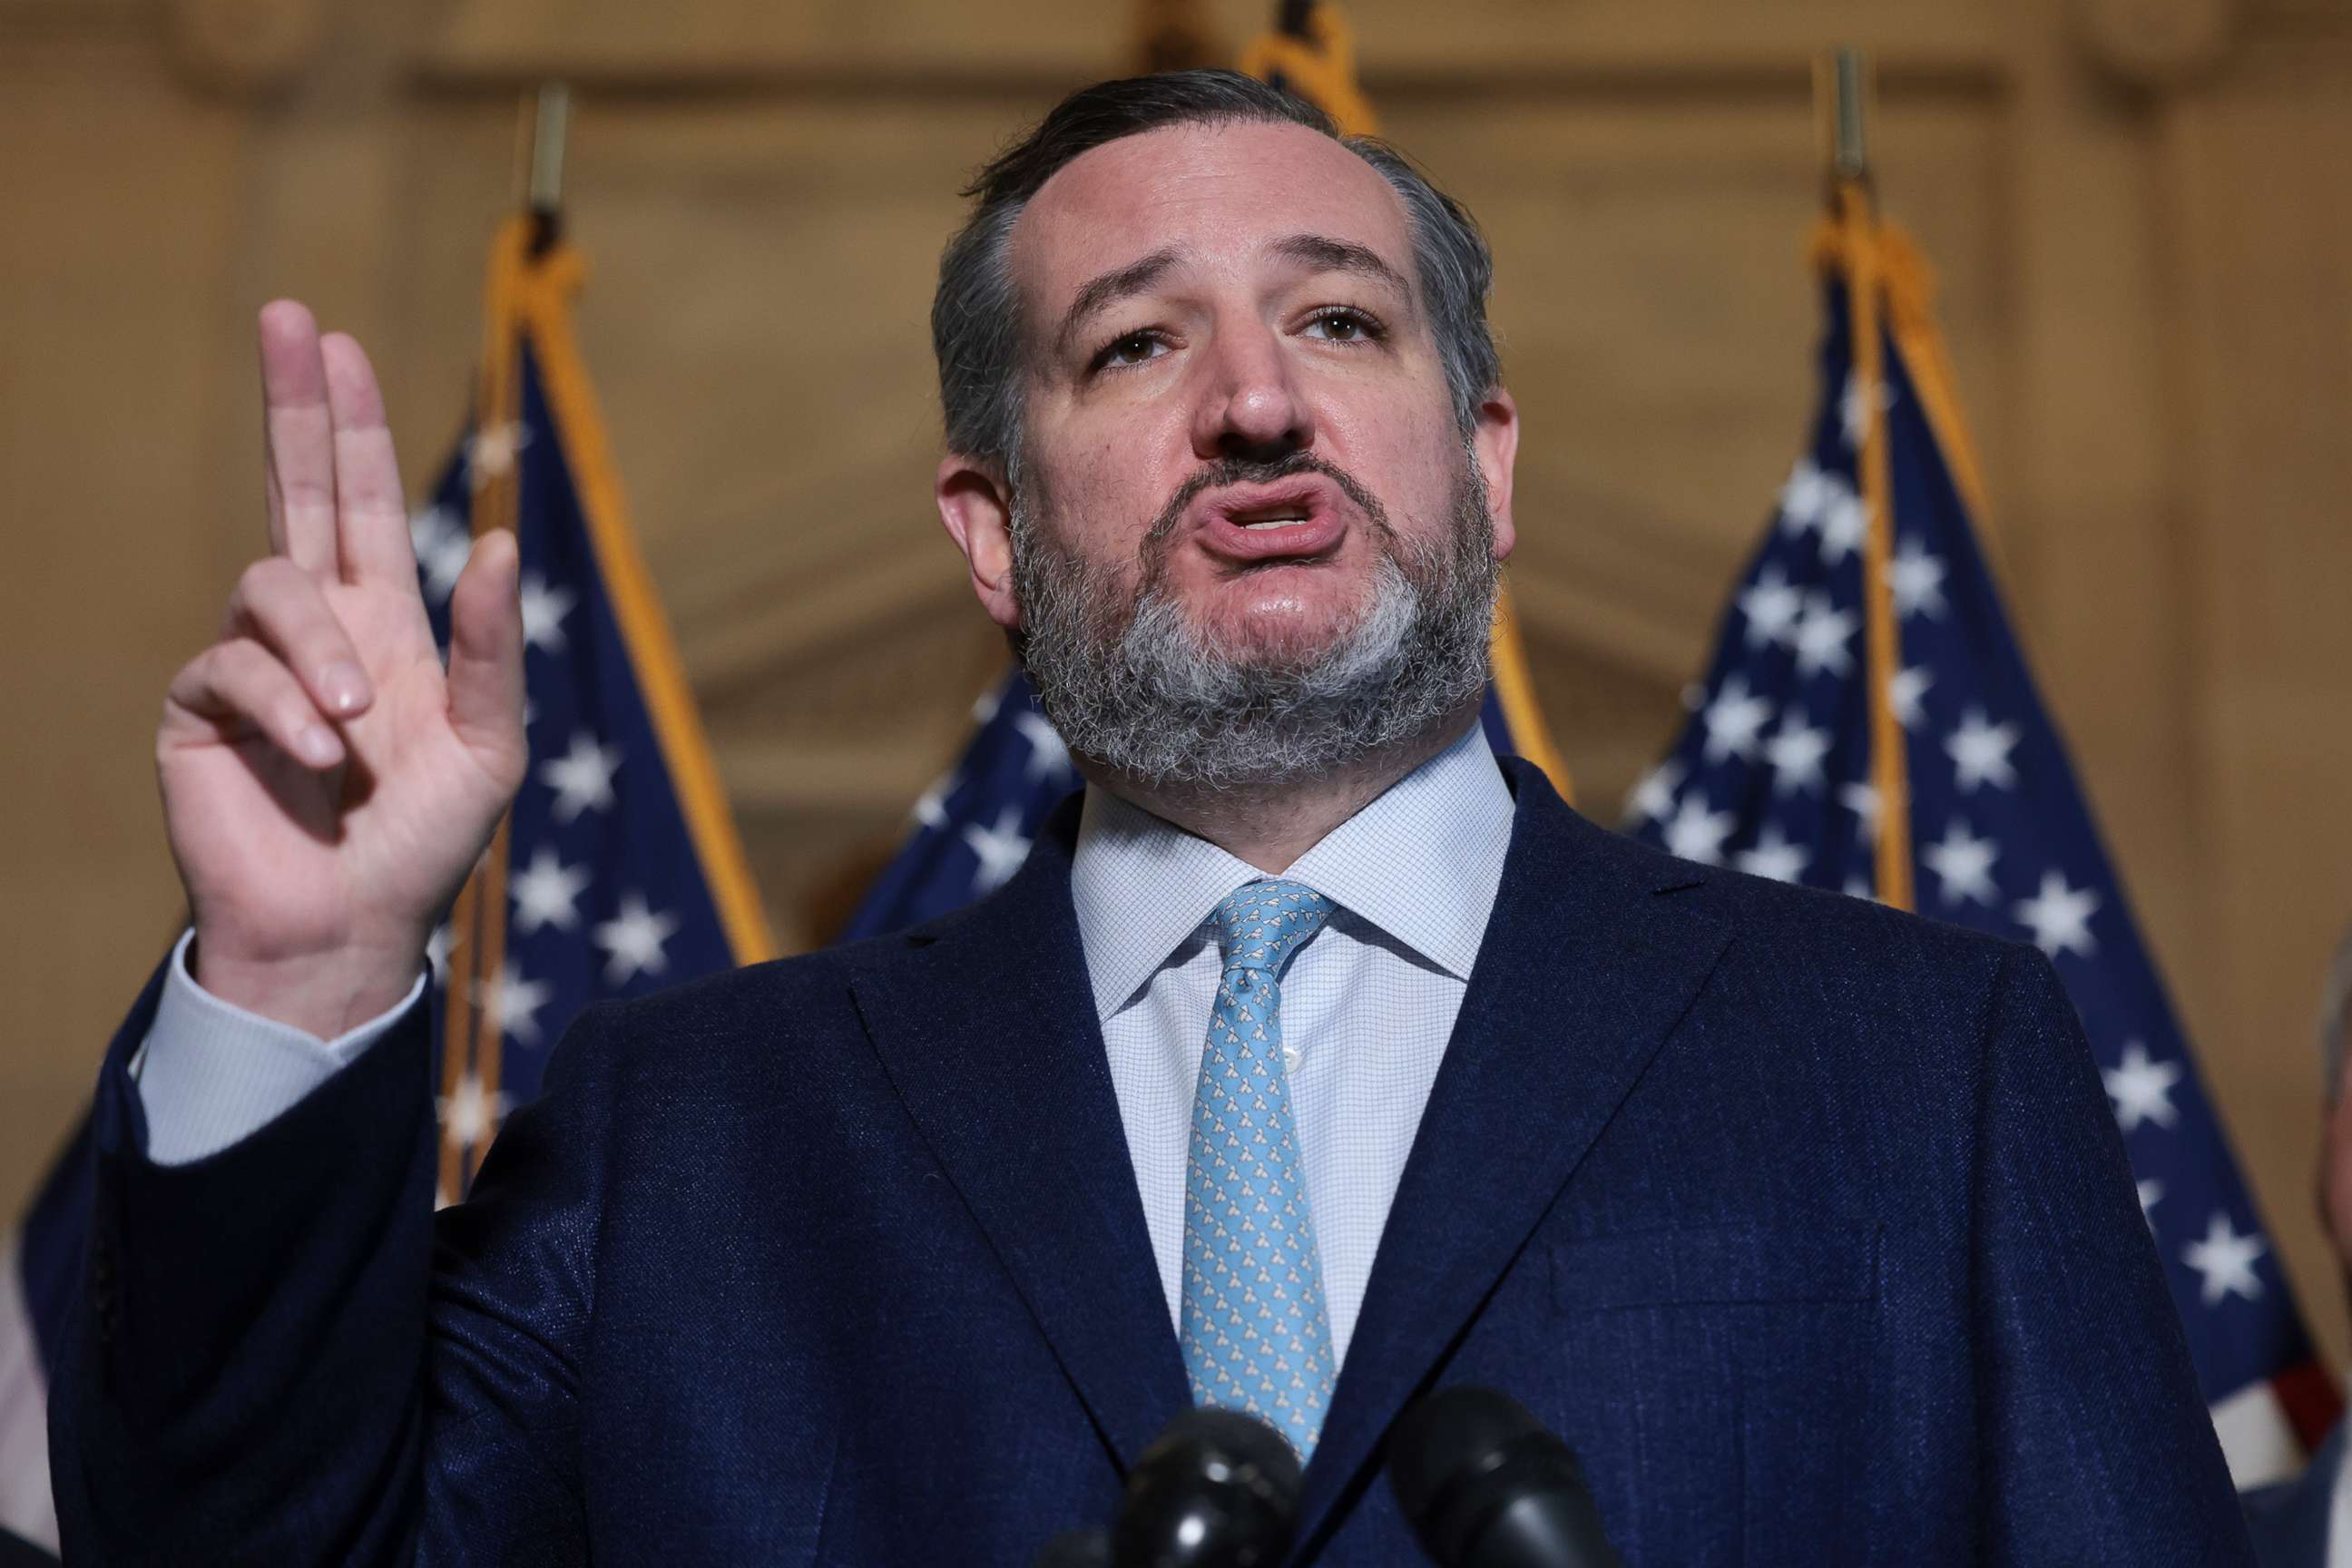 PHOTO: Sen. Ted Cruz speaks during a press conference on Capitol Hill, Feb. 9, 2022.